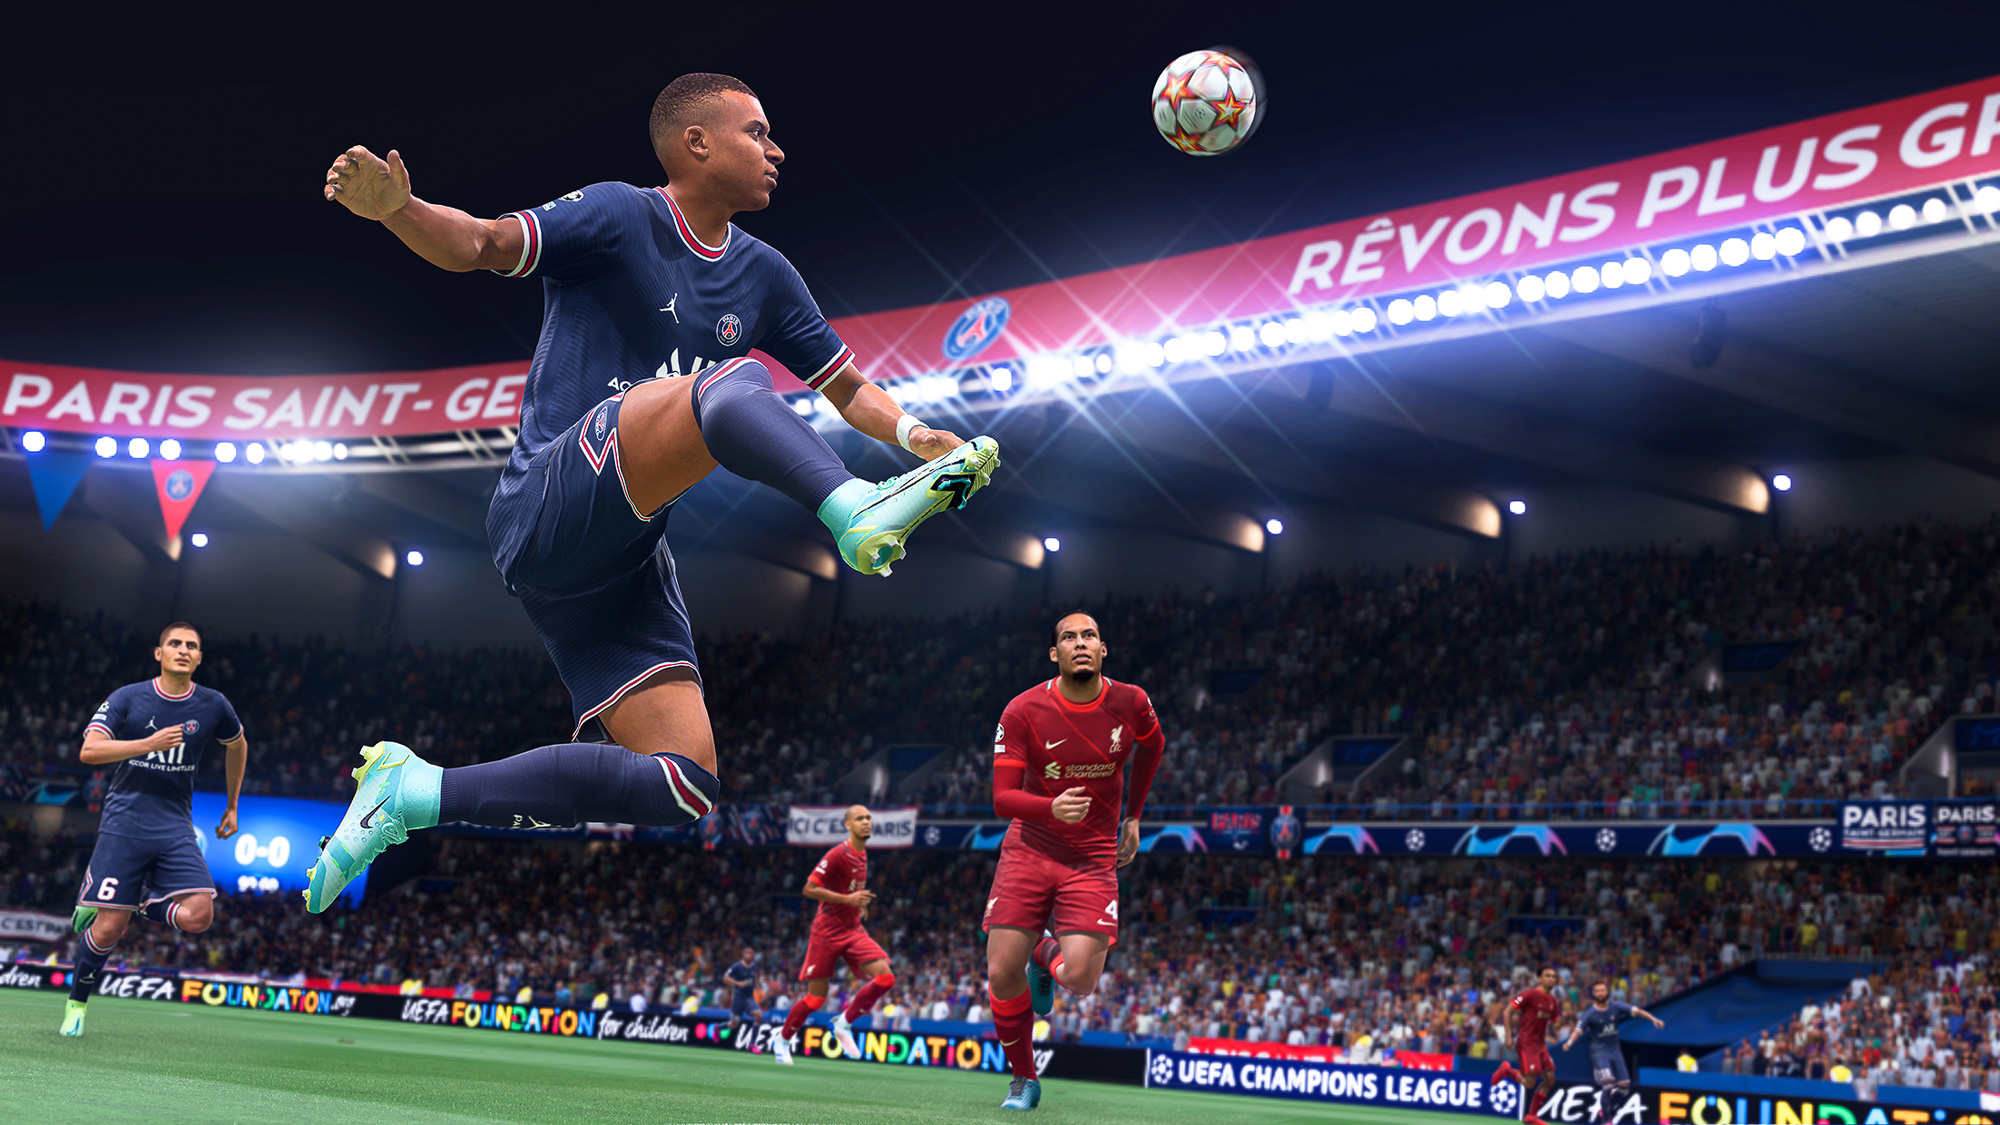 'FIFA 22's HyperMotion Technology Aims To Make The Game Feel Realistic